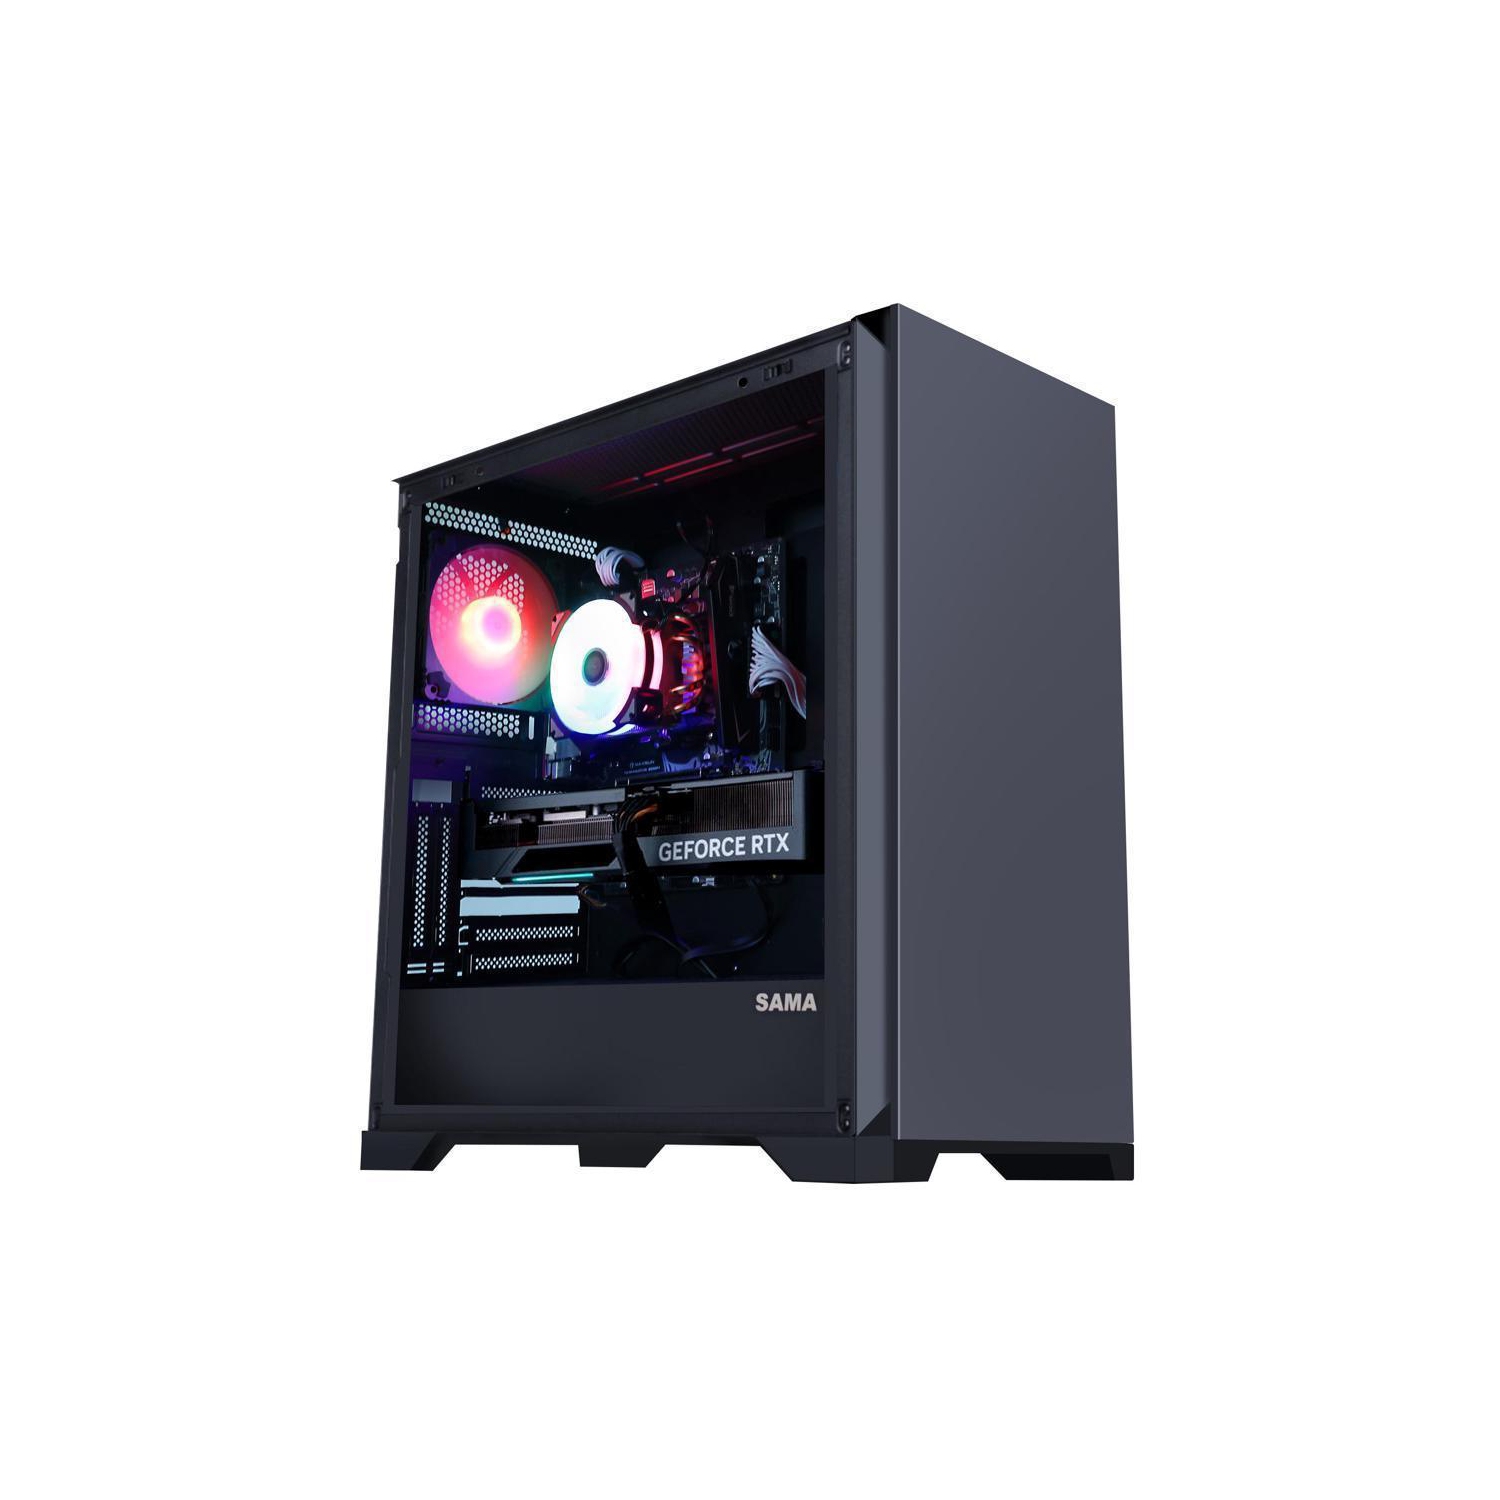 Hoengager Ares Gaming - Intel Core i5-12600K 10-Core 3.7GHz-NVIDIA GeForce RTX 3060 - 16GB DDR4 3200MHz - 500GB M.2 + 2TB 2.5'' SATA SSD- WIFI -RGB Fans - Windows 11 Pro Computer